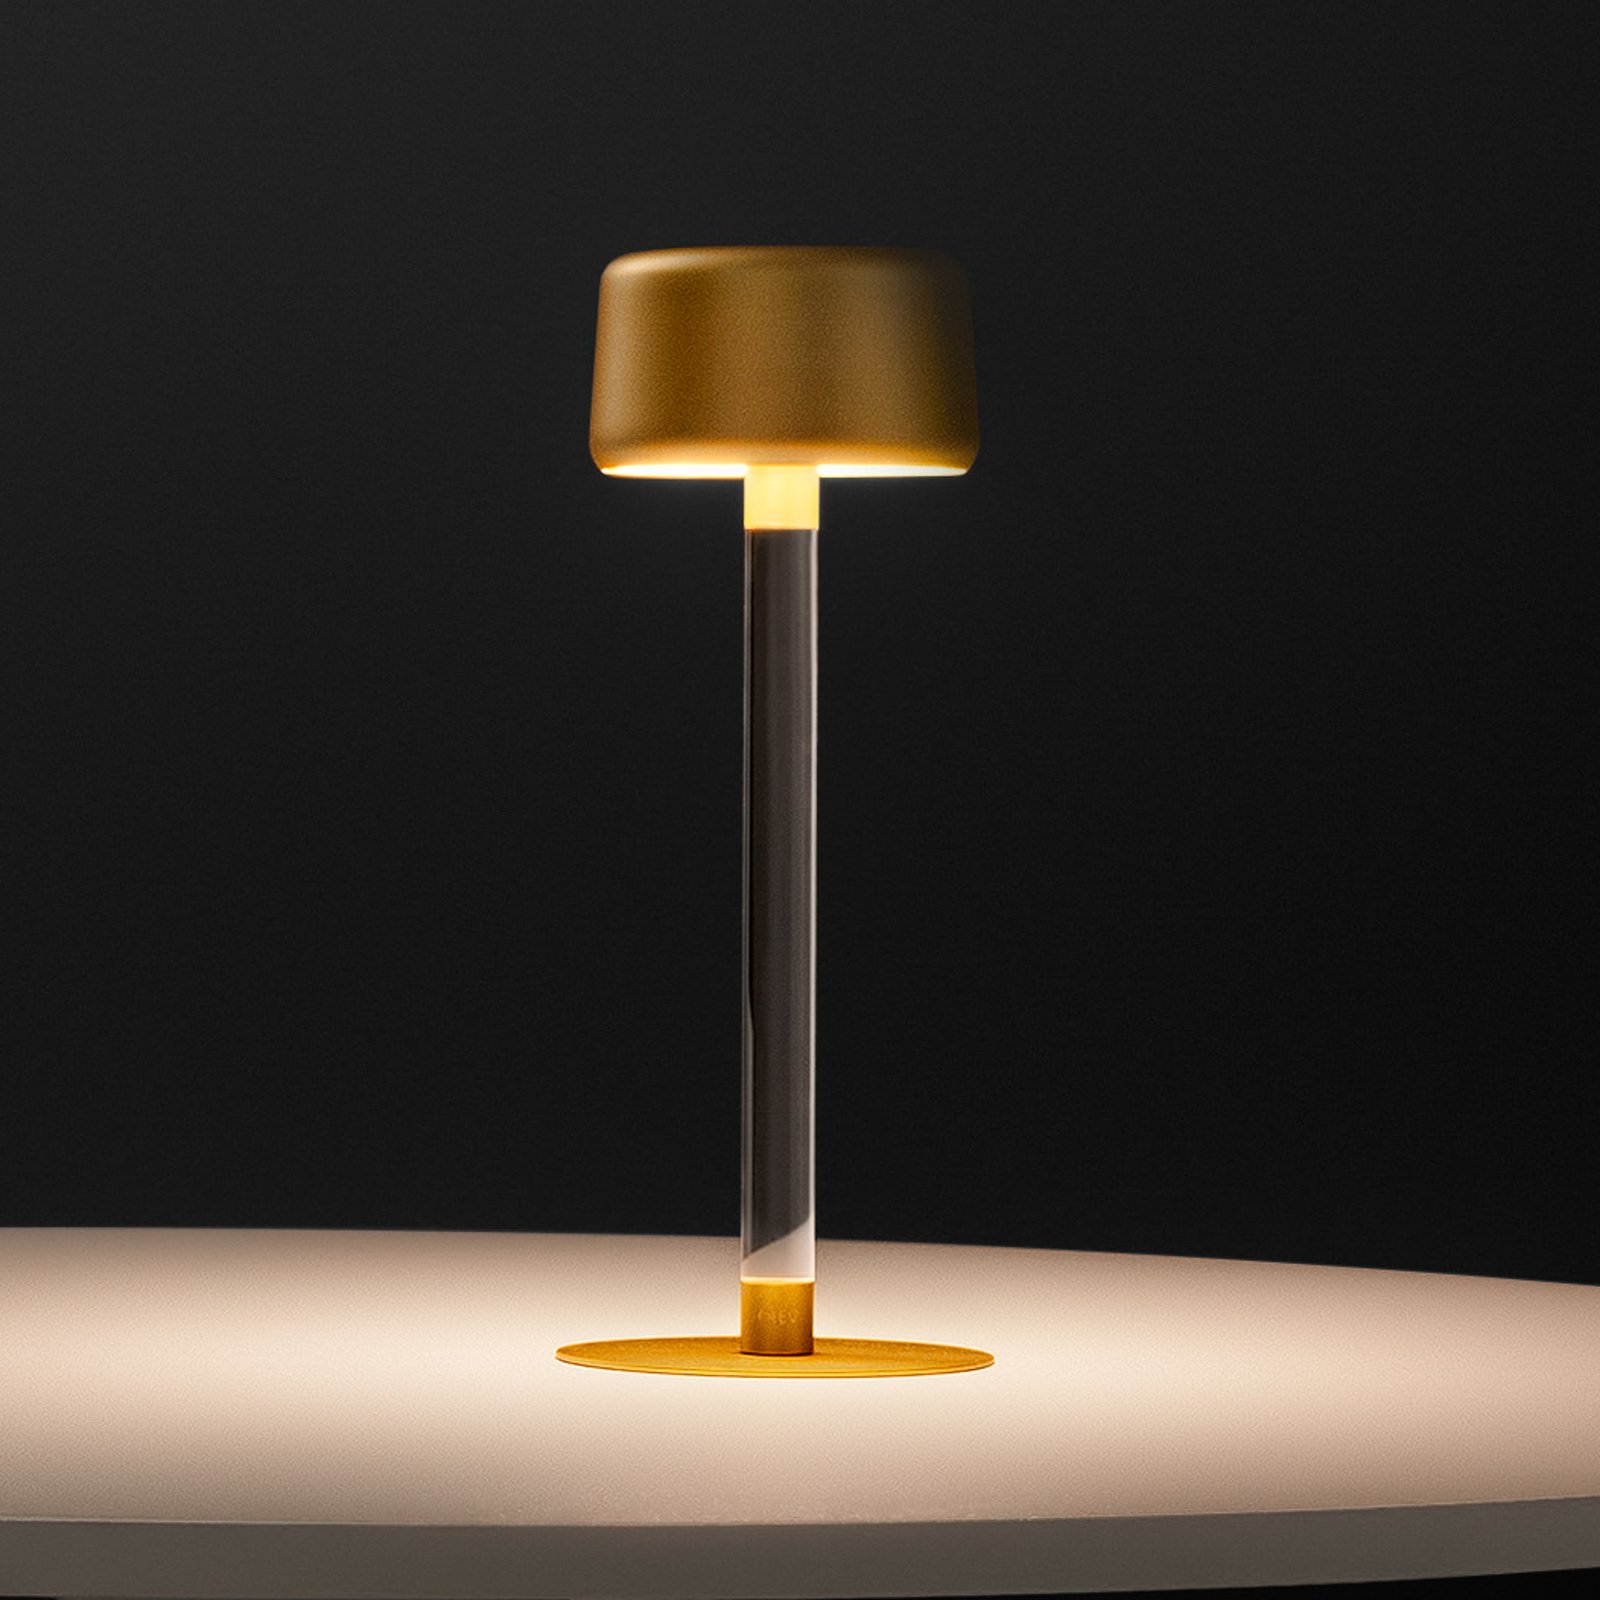 OLEV Tee designer table lamp with a battery, gold